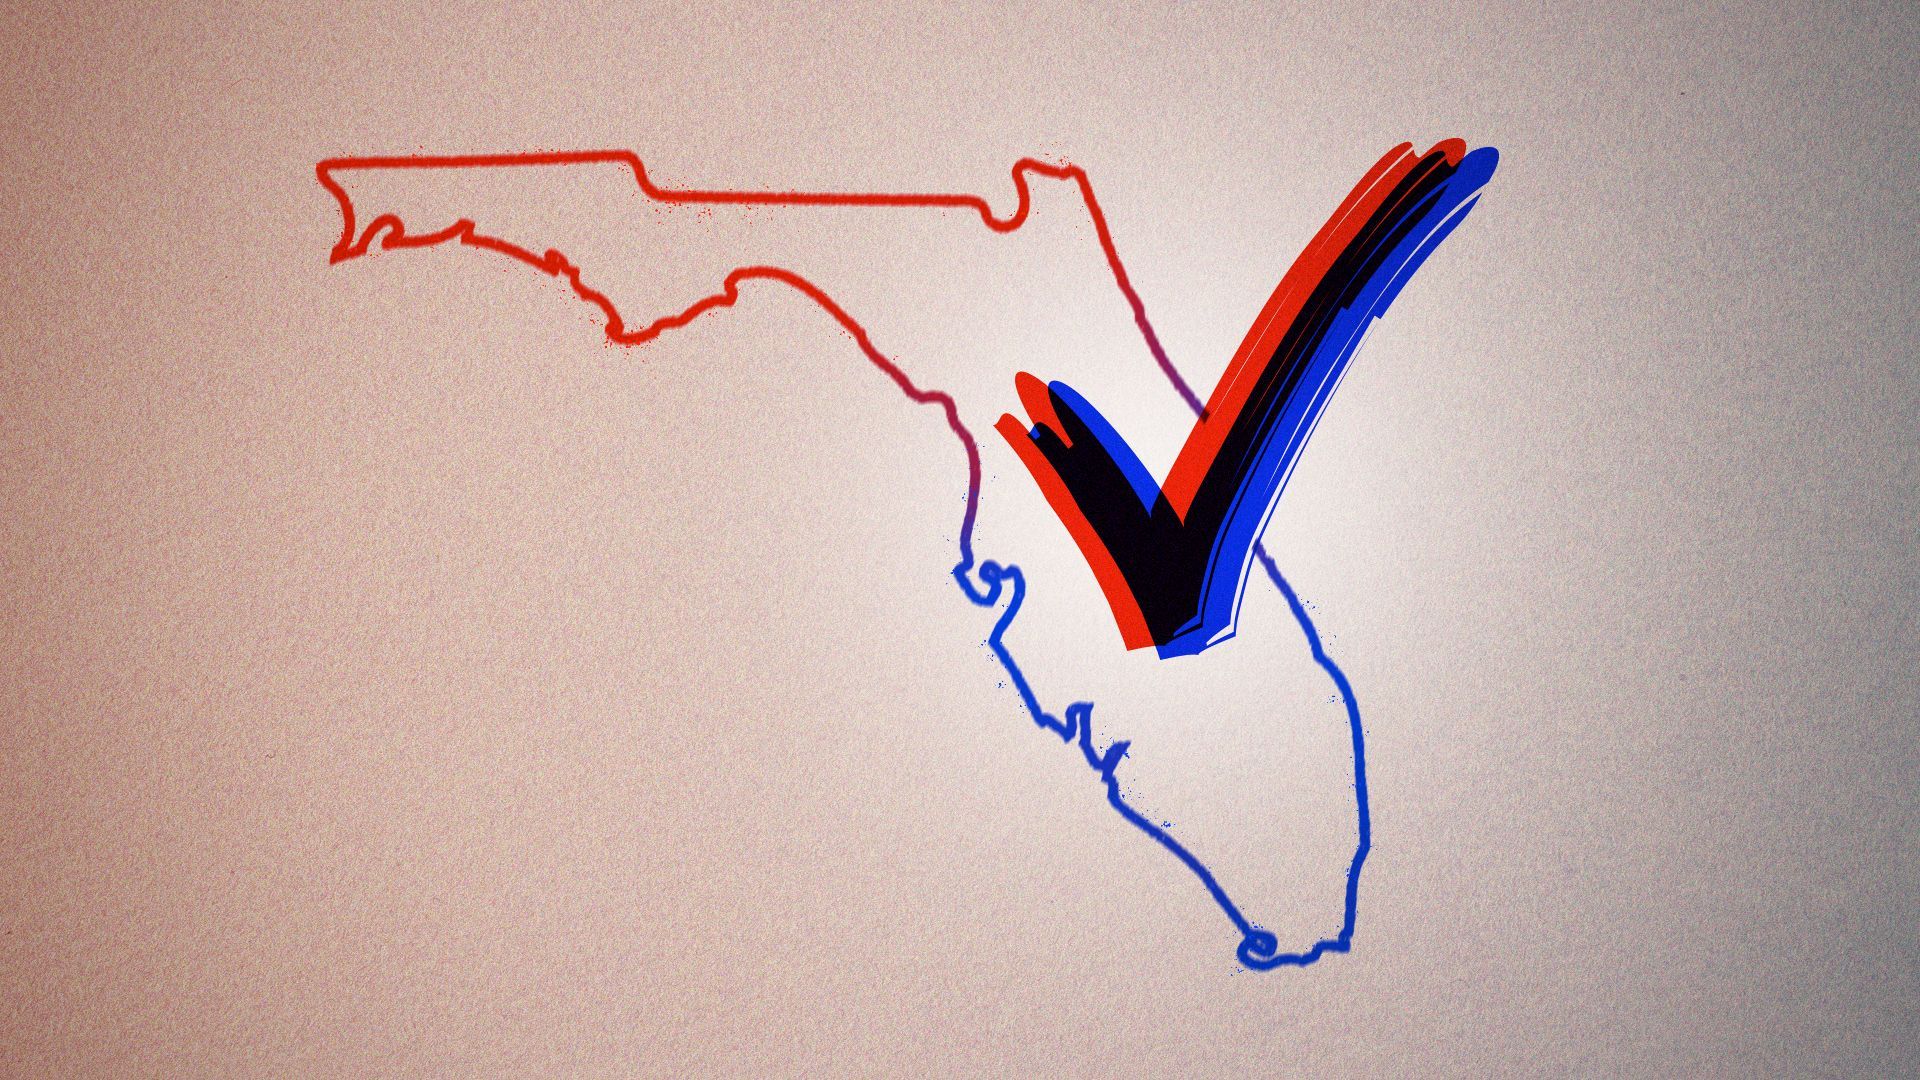 Illustration of a red and blue check mark in the center of an outline of the shape of Florida.